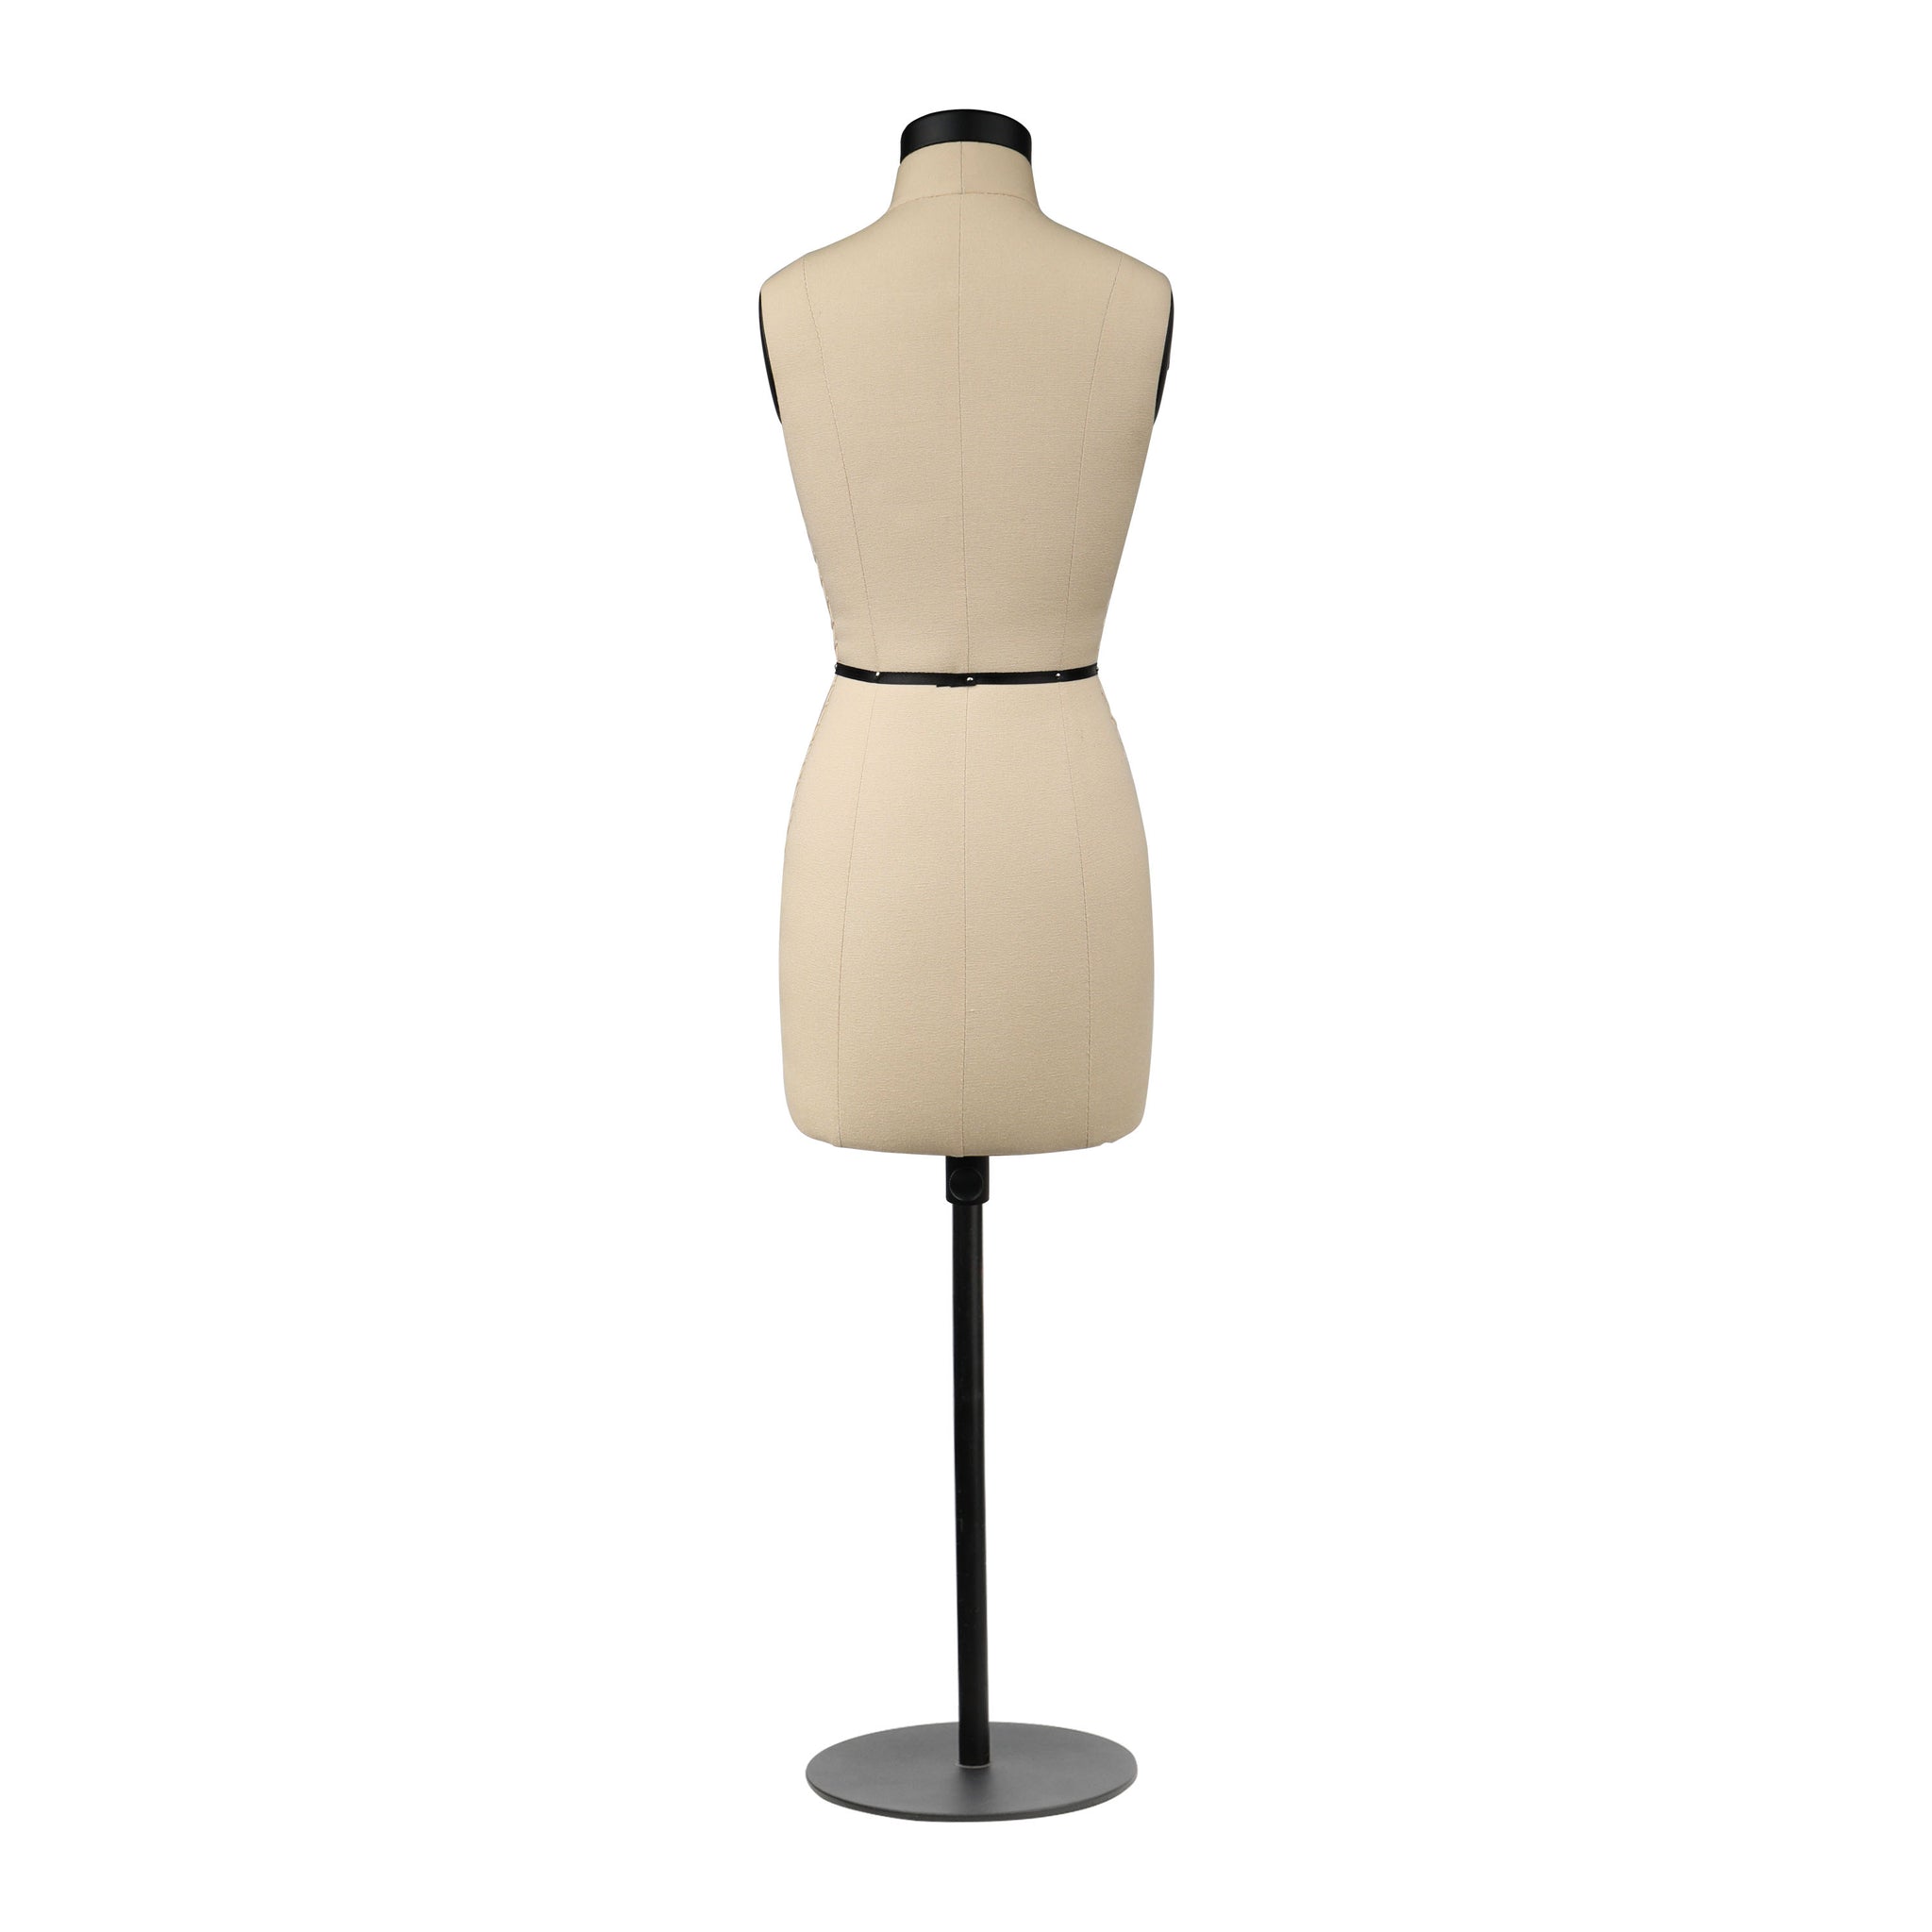 Professional Sewing Dress Form Size 6 Dressform Manequin, High Quality 